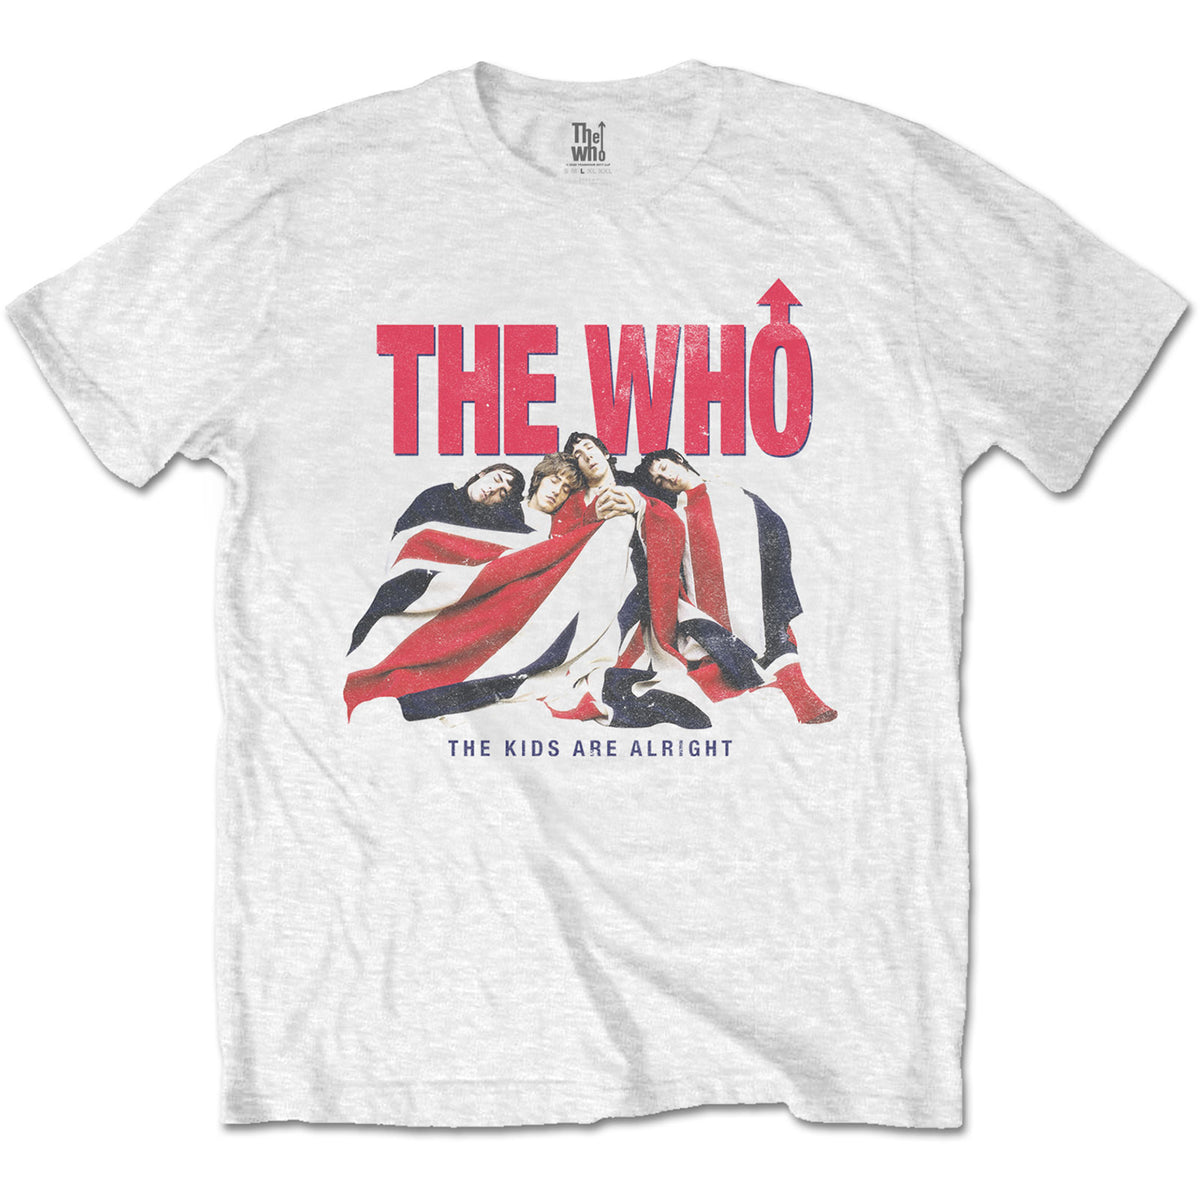 Band Shirt, The Who, Kids Are Alright Vintage